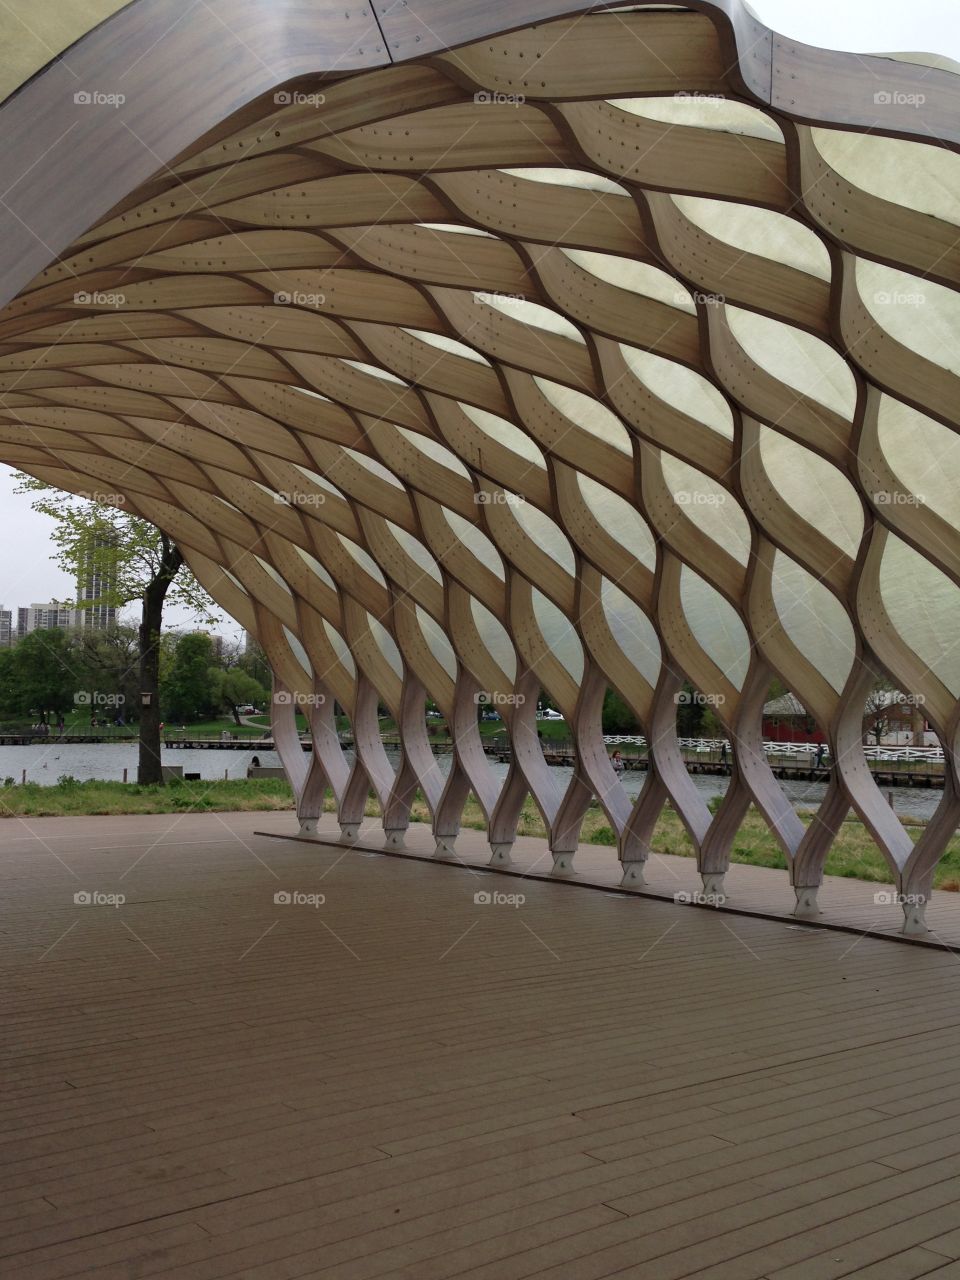 South Pond Pavilion, Lincoln Park Zoo, Chicago, Illinois
Studio Gang Architects, 2010
